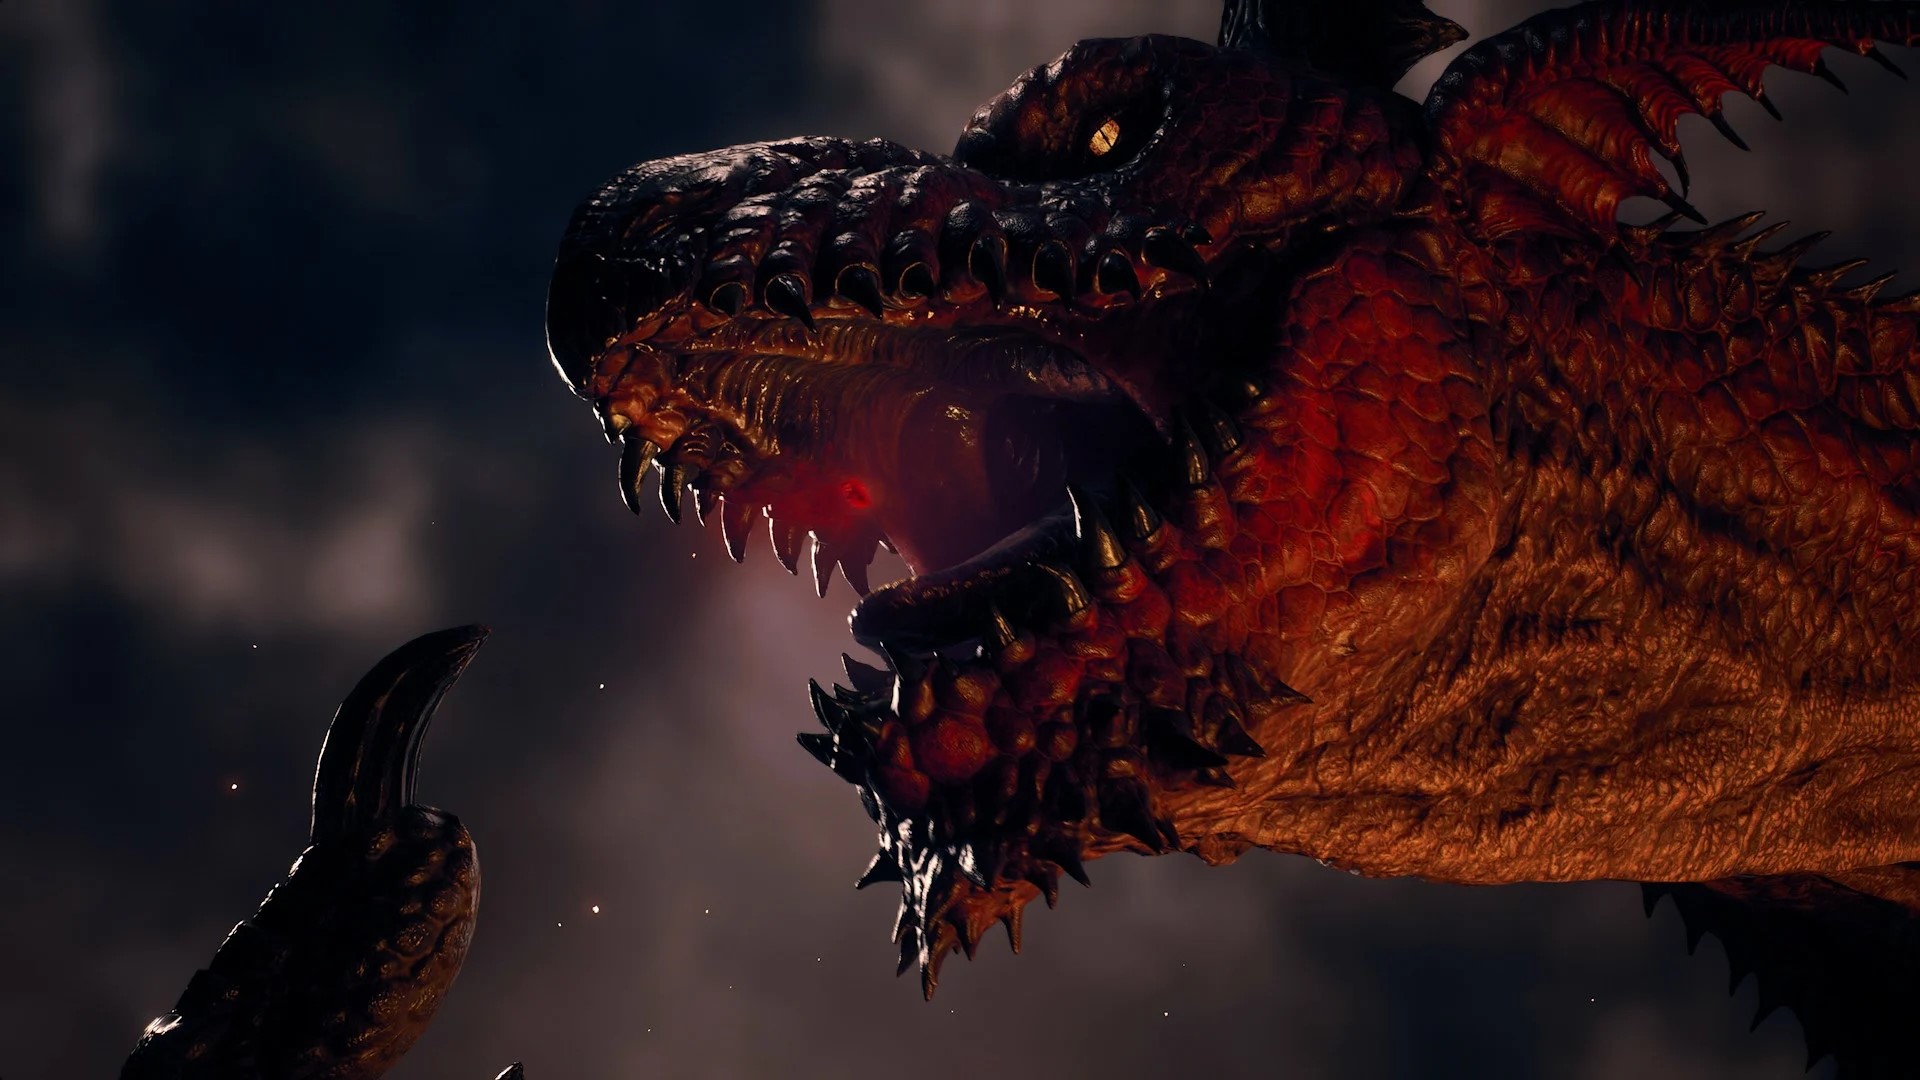 New Dragon’s Dogma 2 Showcase Coming This Month, Release Date Reportedly Leaked